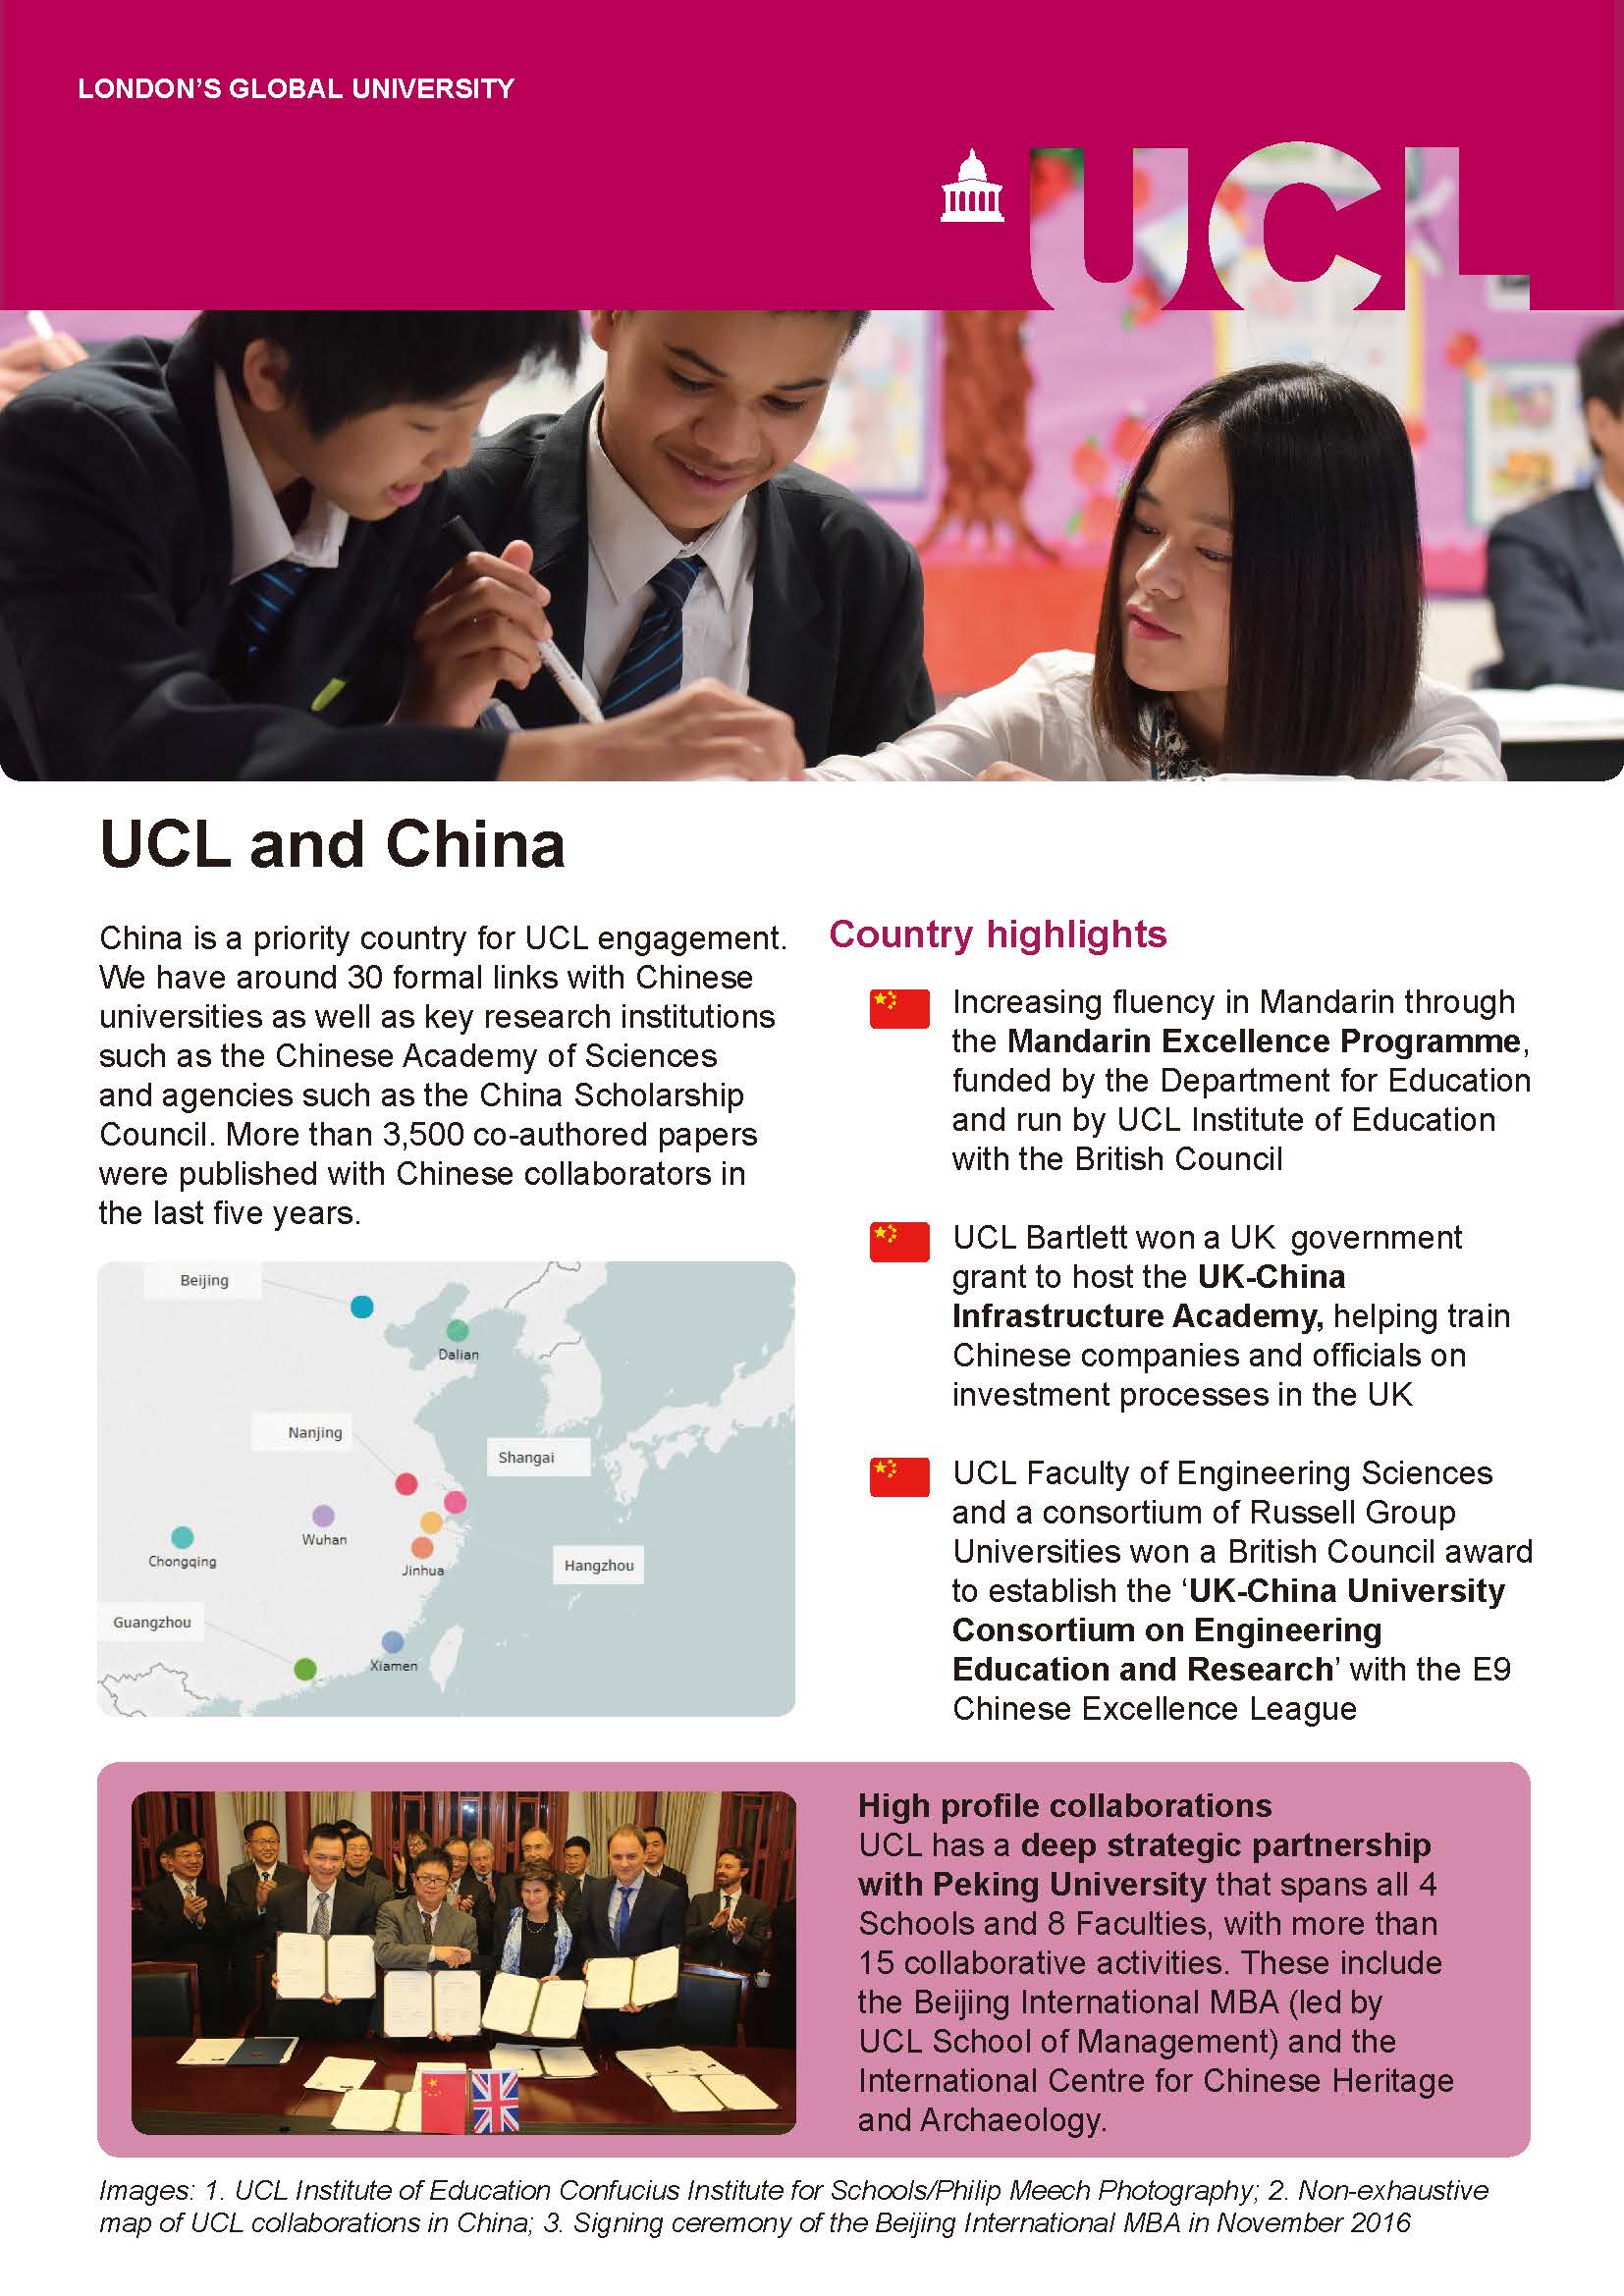 ucl_and_china_resource_页面_1.jpg